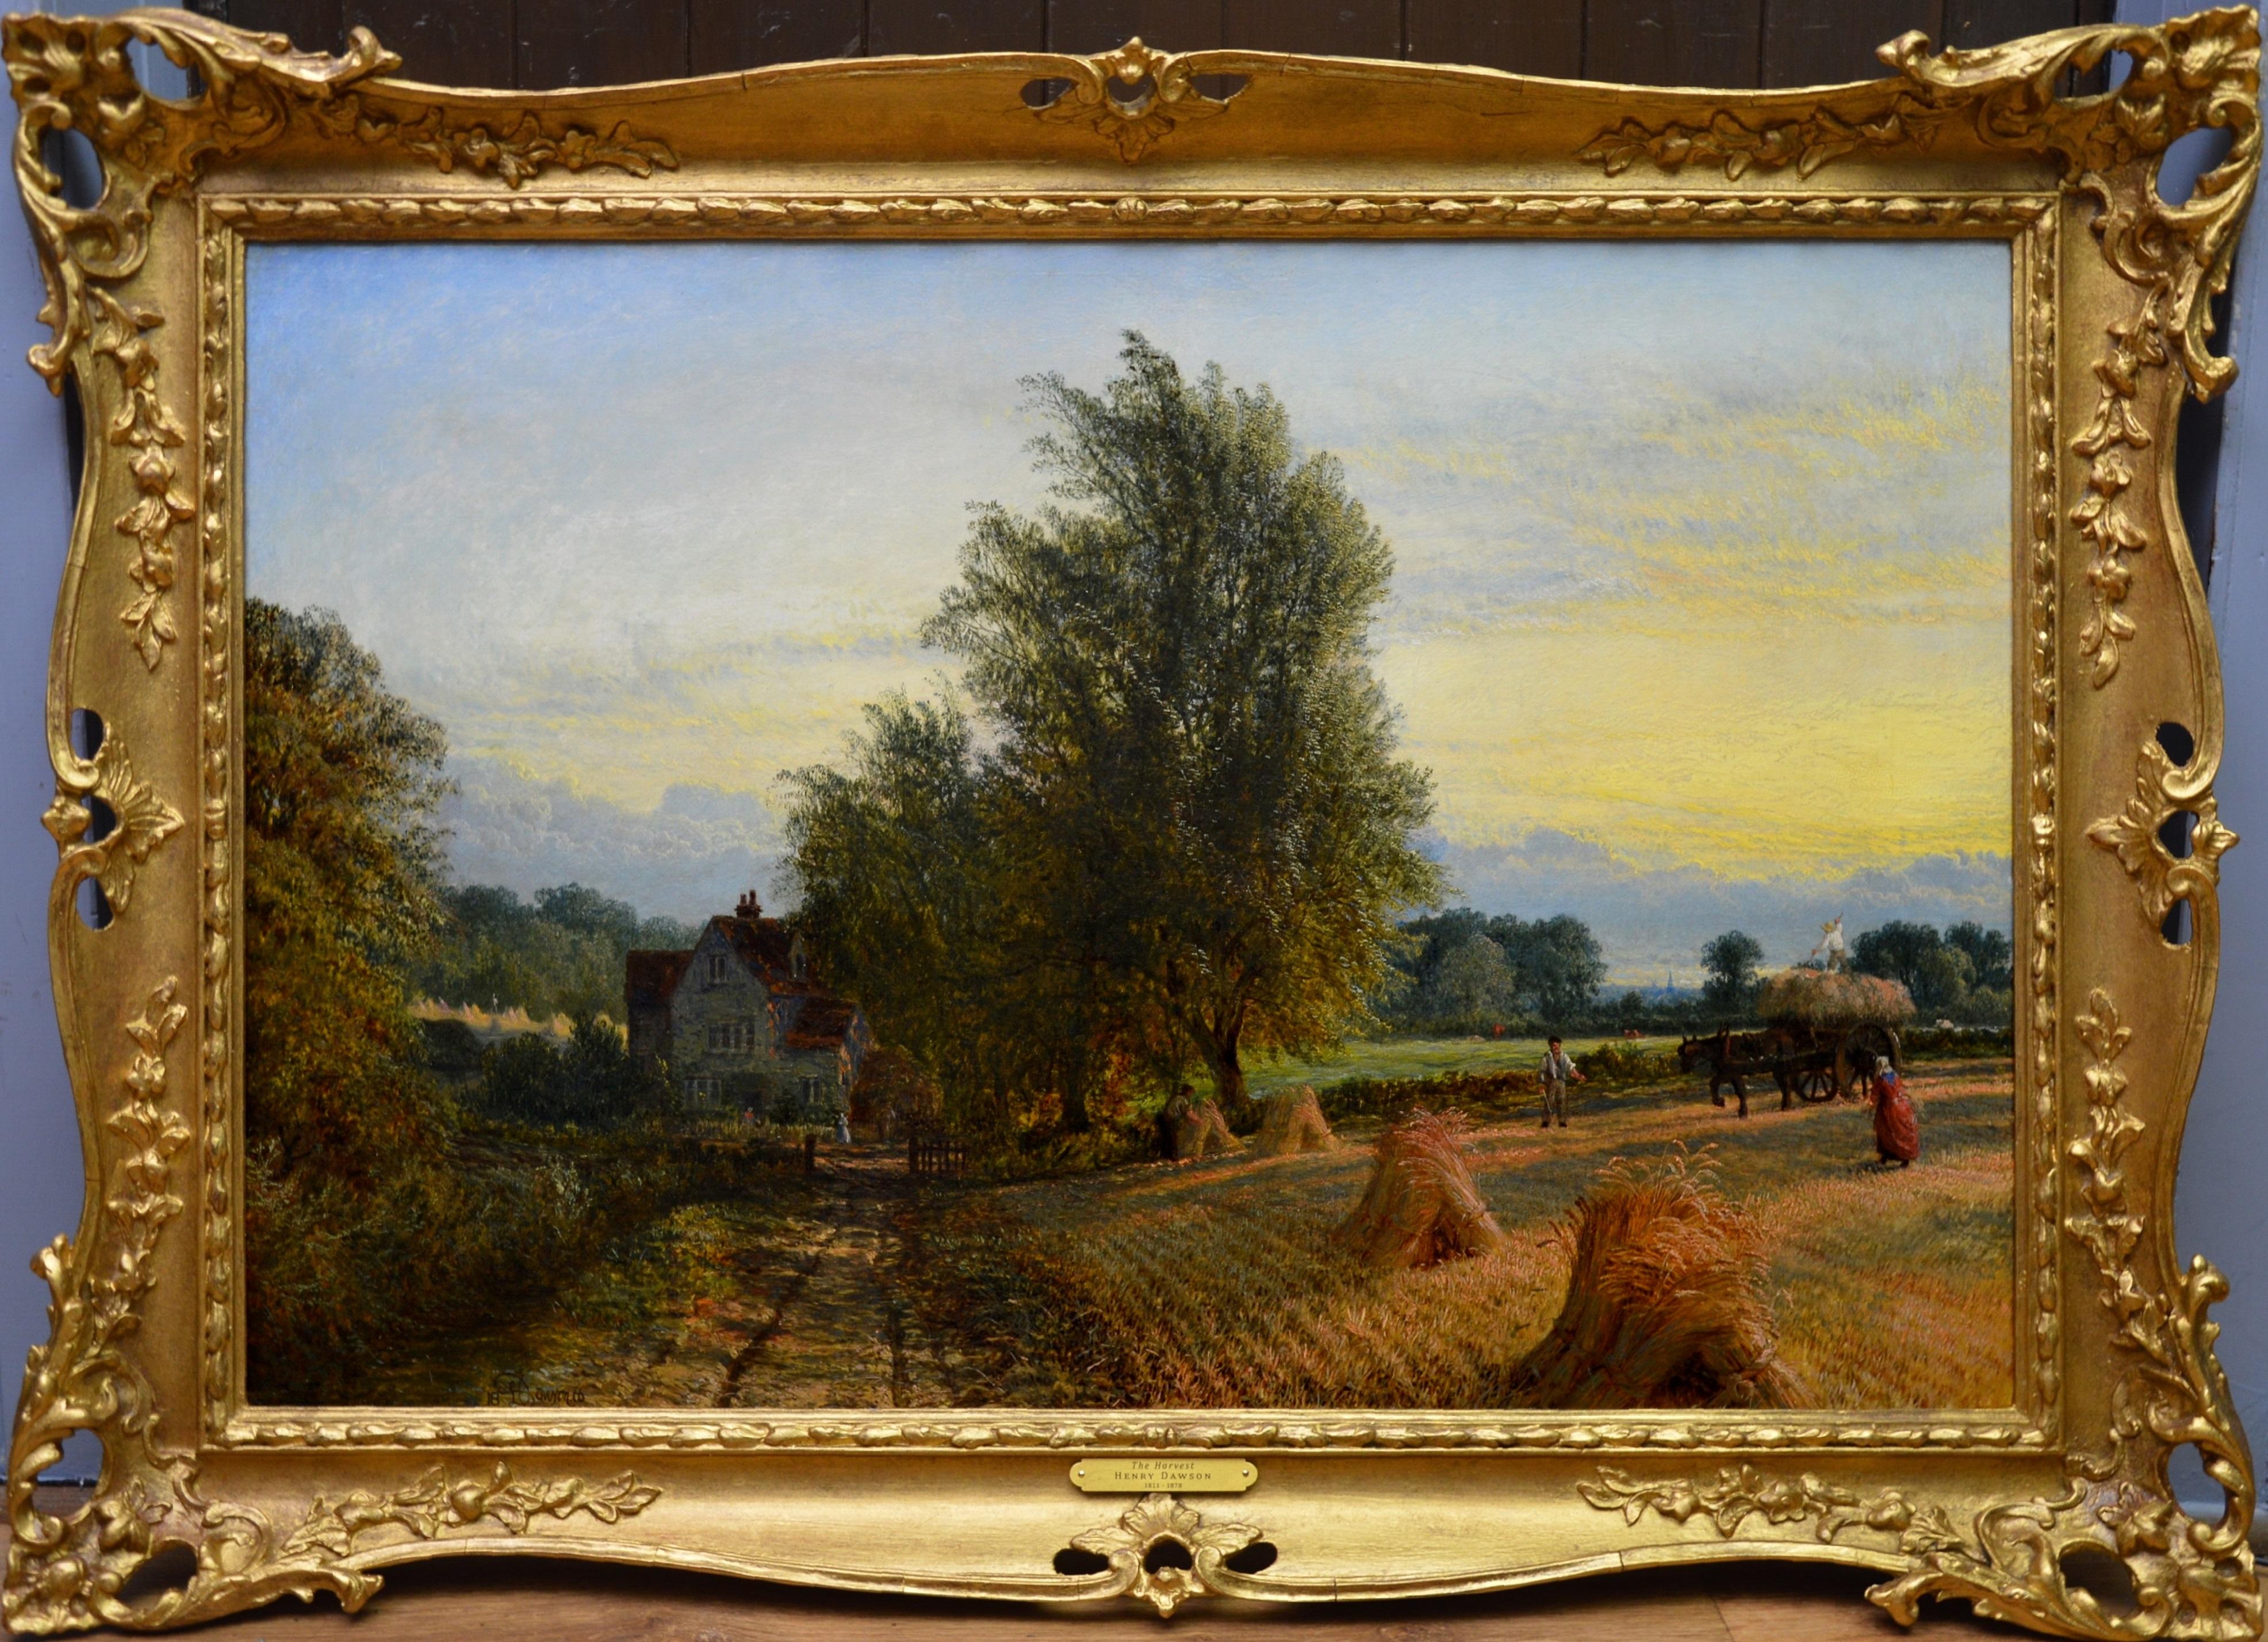 Henry Dawson Figurative Painting - The Harvest - 19th Century English Summer Sunset Landscape Oil Painting